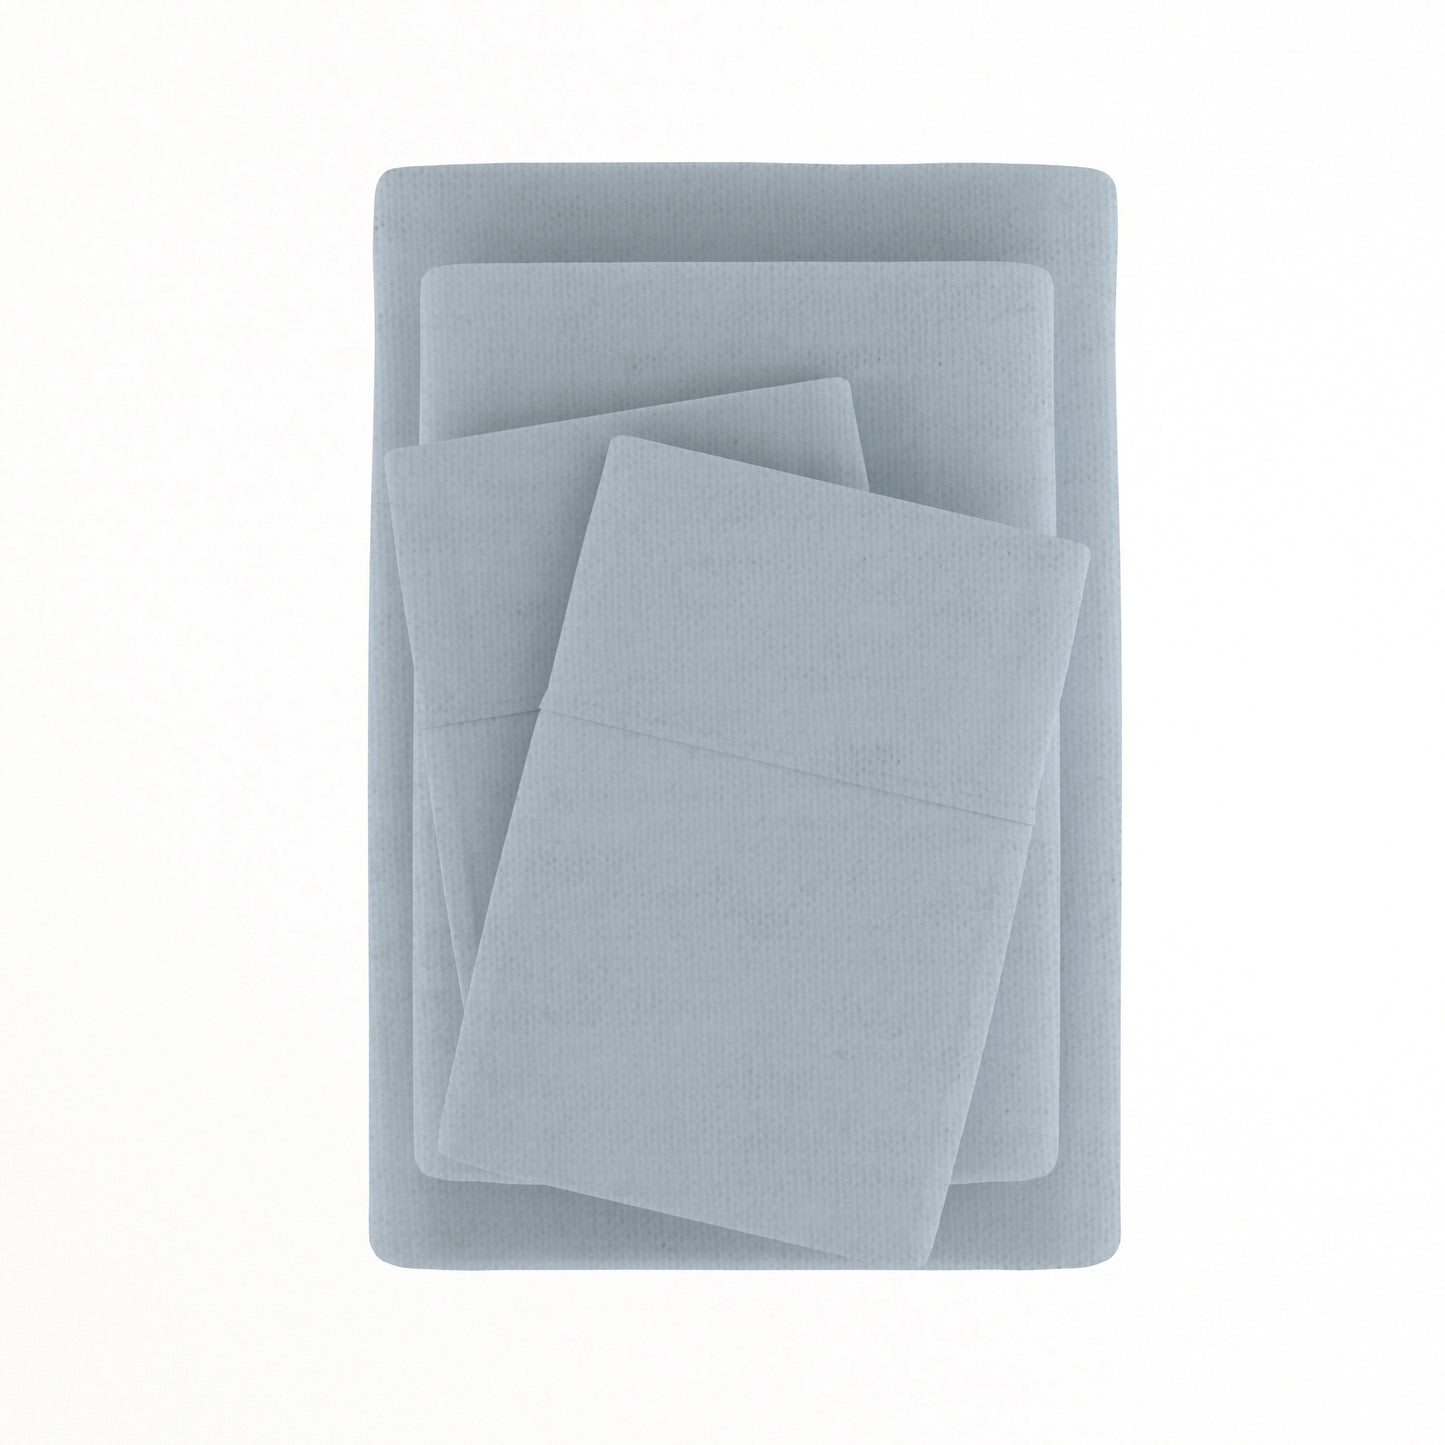 100% Cotton Flannel Sheet Sets in Solid Colors